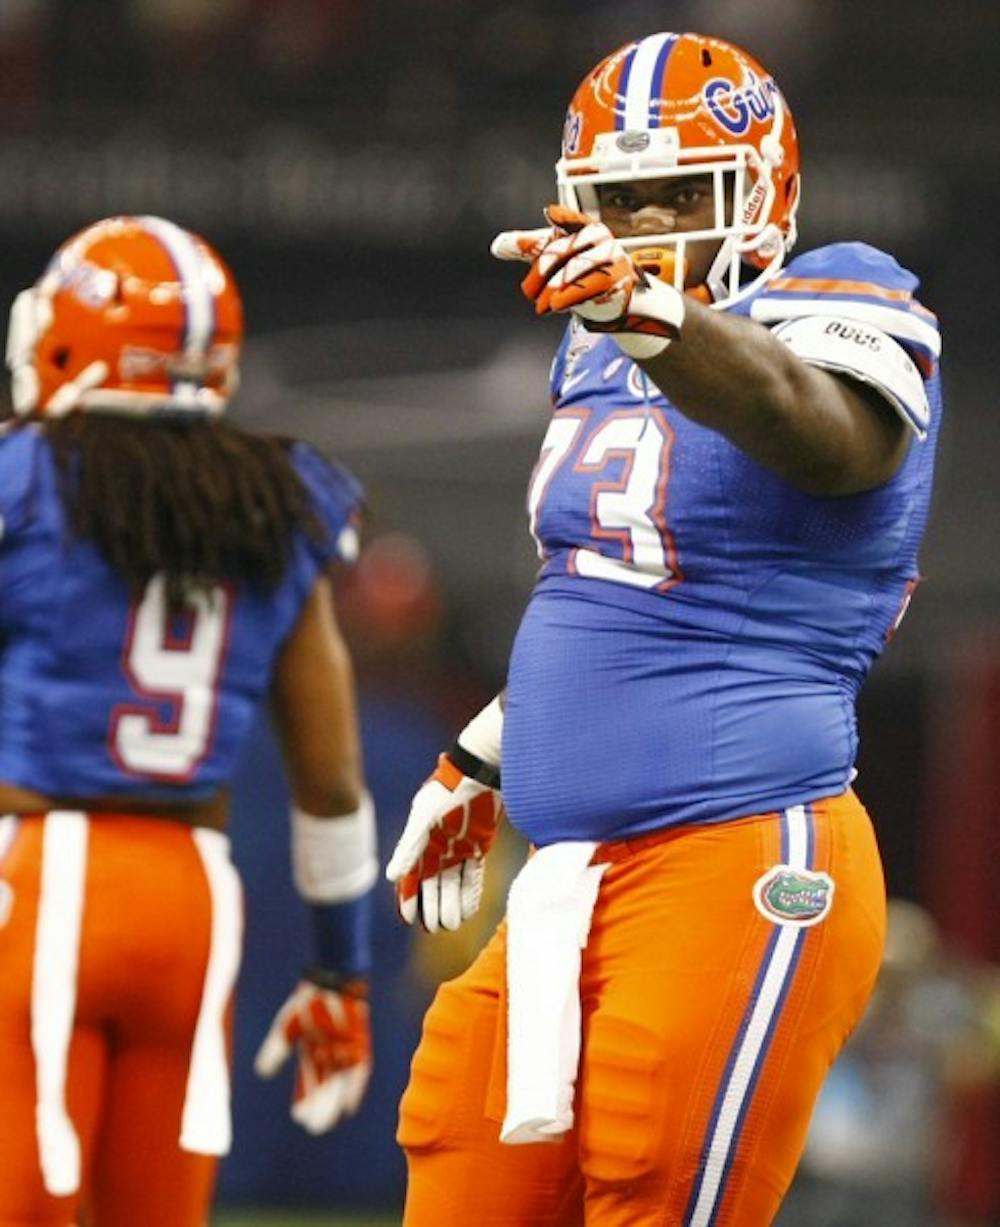 <p>Defensive tackle Sharrif Floyd points to a teammate during Florida’s 33-23 loss to Louisville in the Sugar Bowl on Jan. 2 in New Orleans.</p>